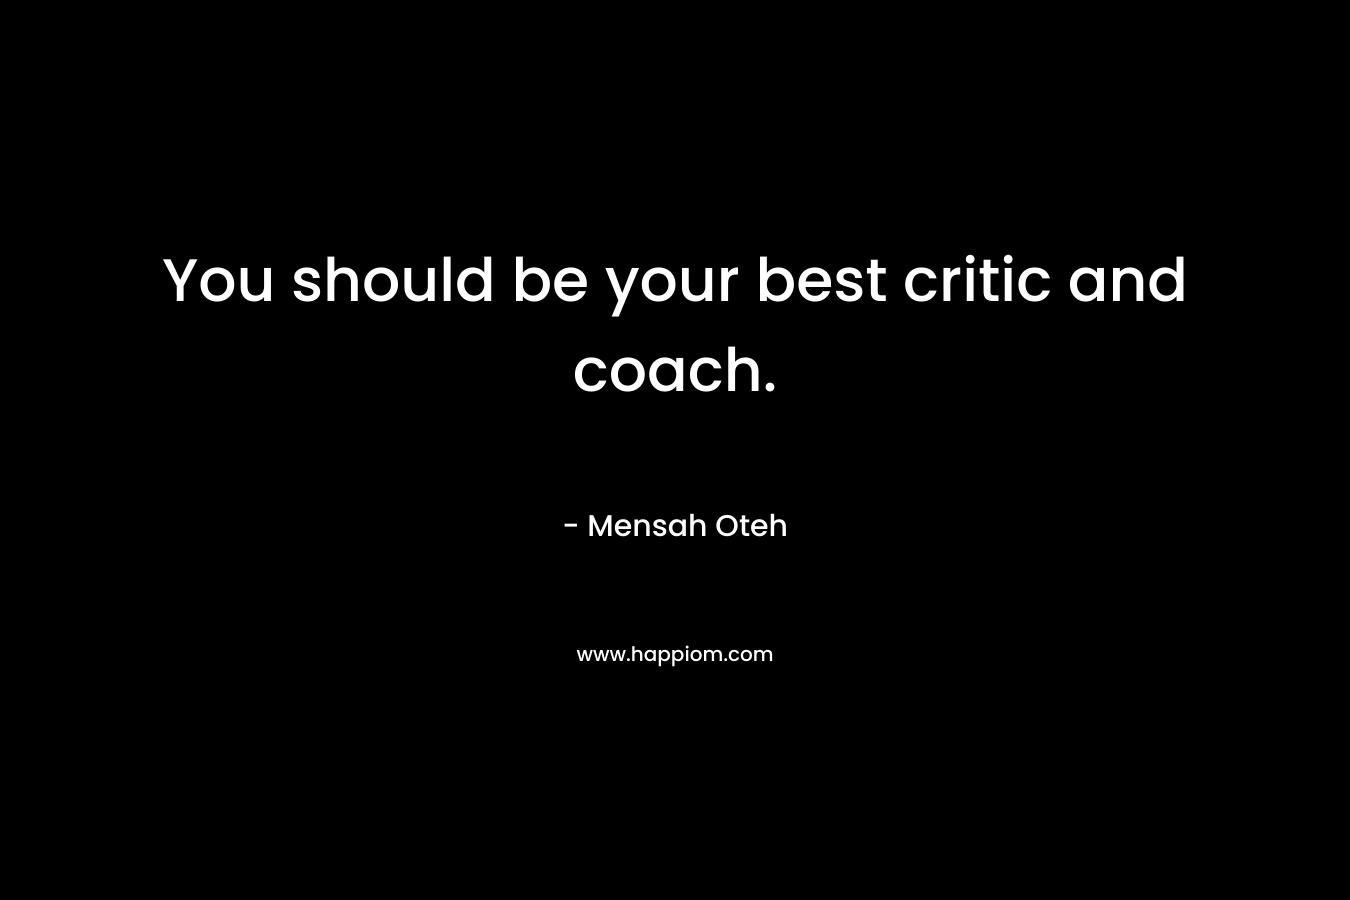 You should be your best critic and coach.